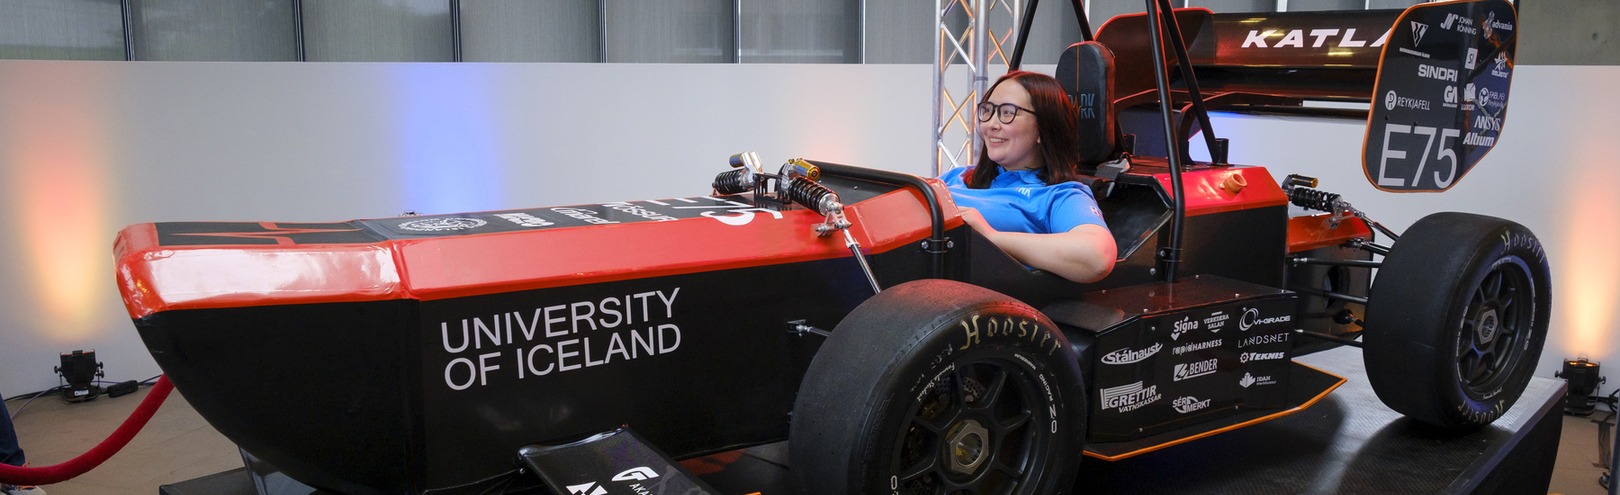 Team Spark&#039;s car TS21 unveiled at the University Centre - Available at University of Iceland